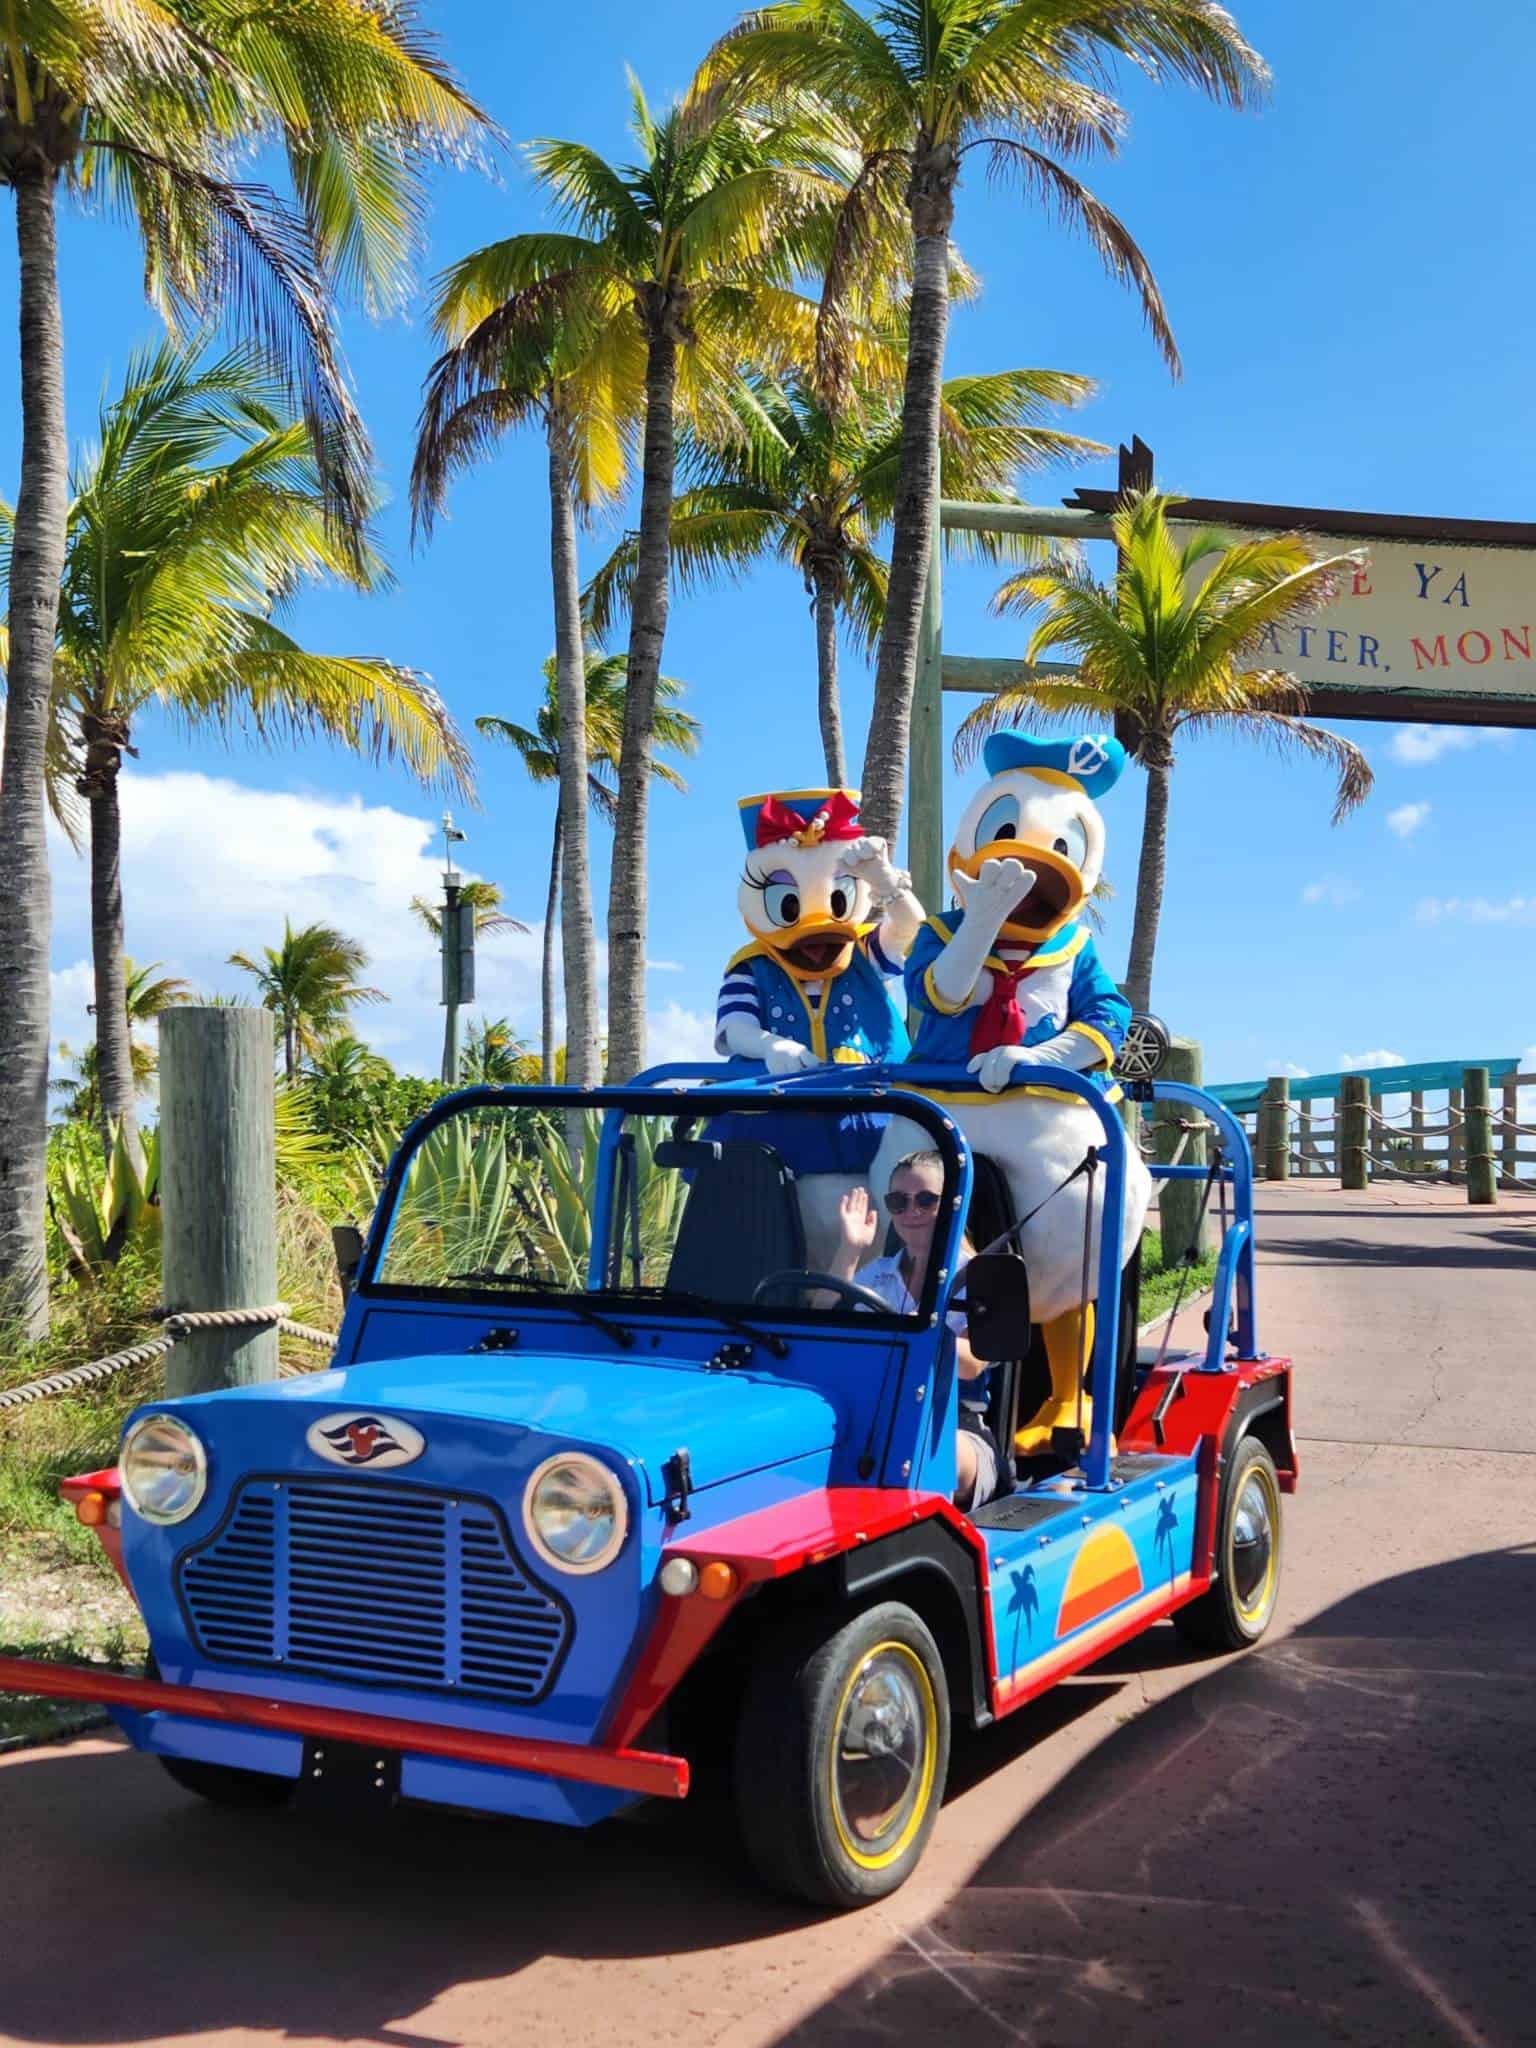 Character interactions are a perk at Castaway Cay